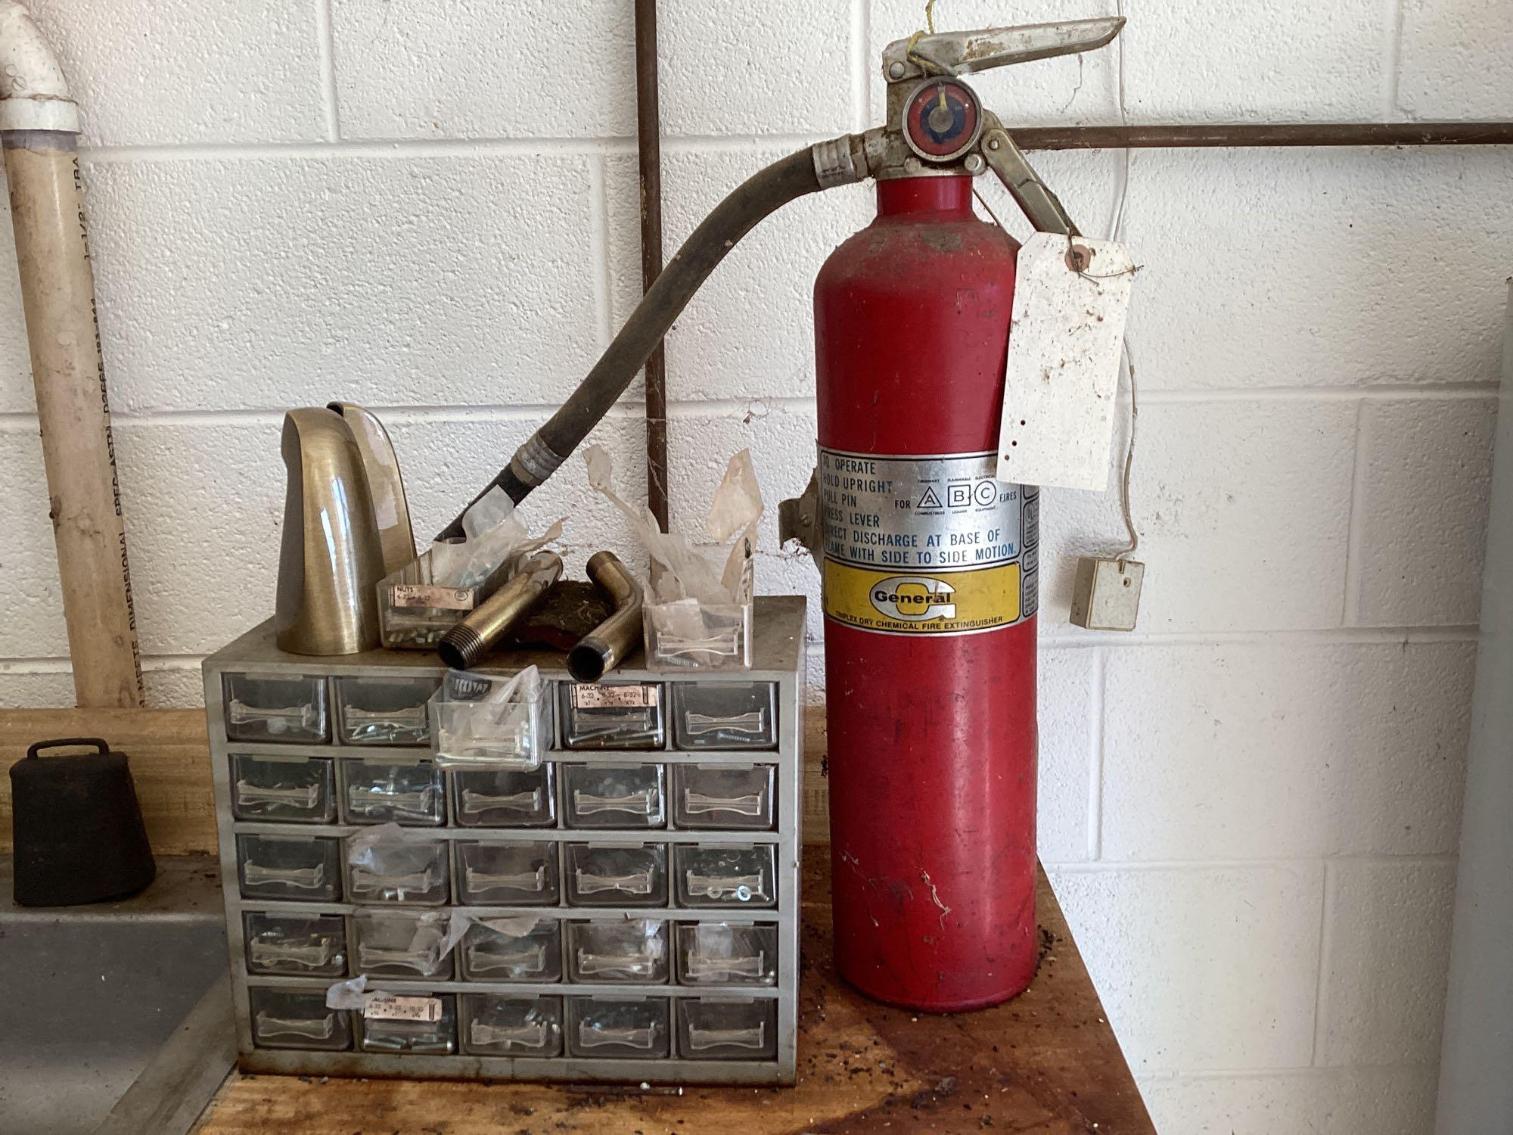 Image for Fasteners in Plastic Box and Fire Extinguisher